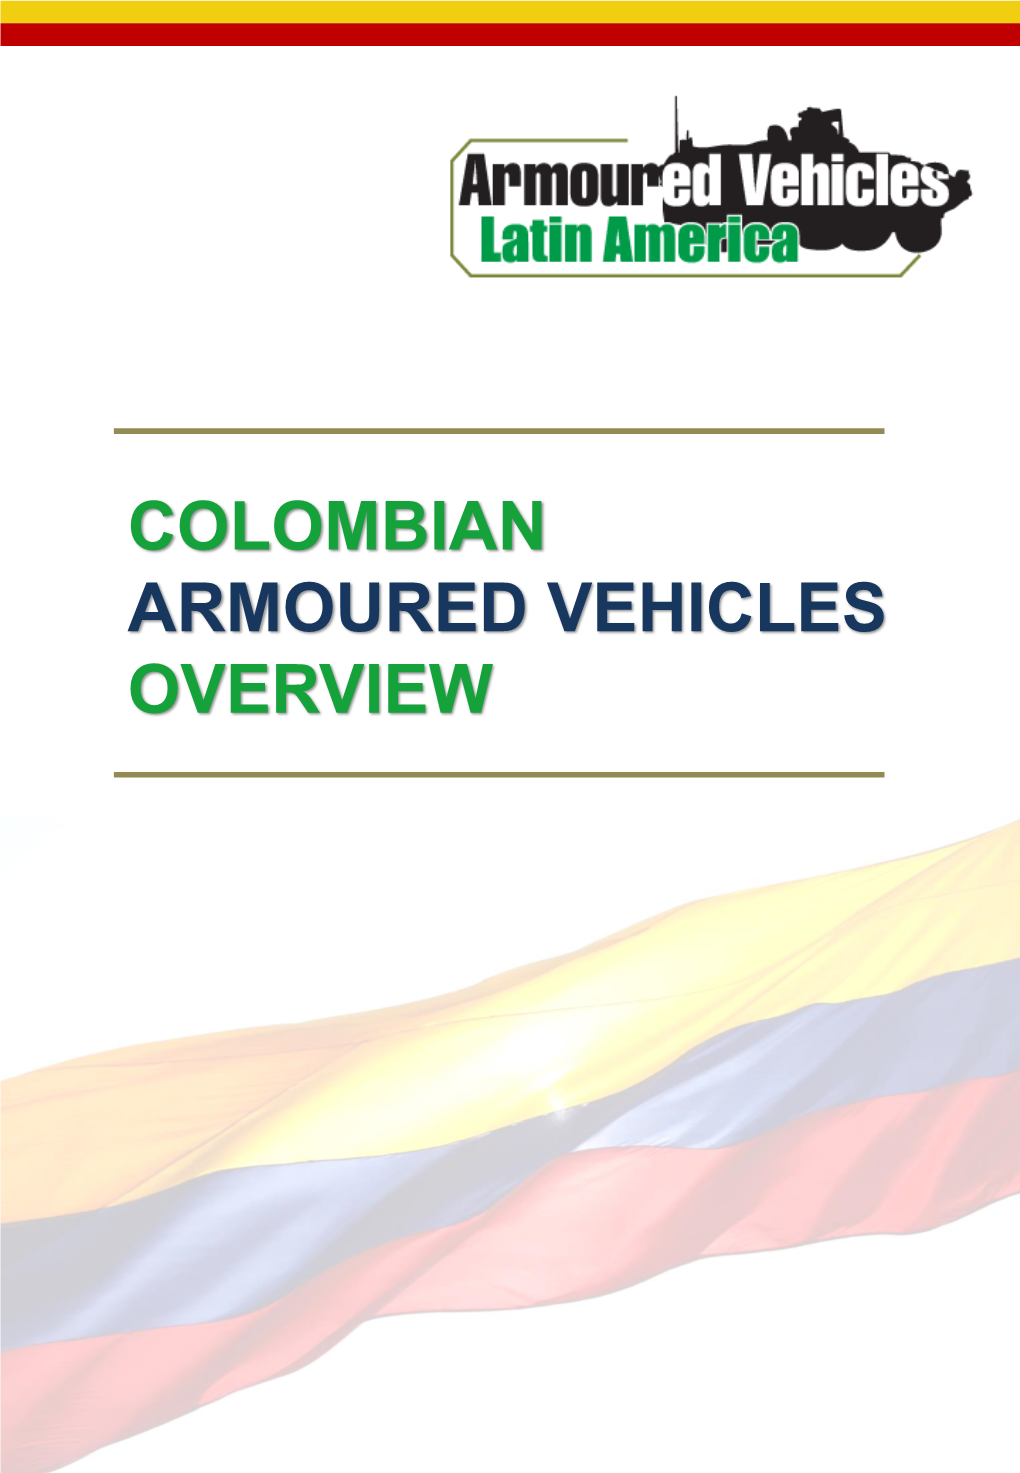 Colombian Armoured Vehicles Overview Armoured Vehicles Latin America 2015